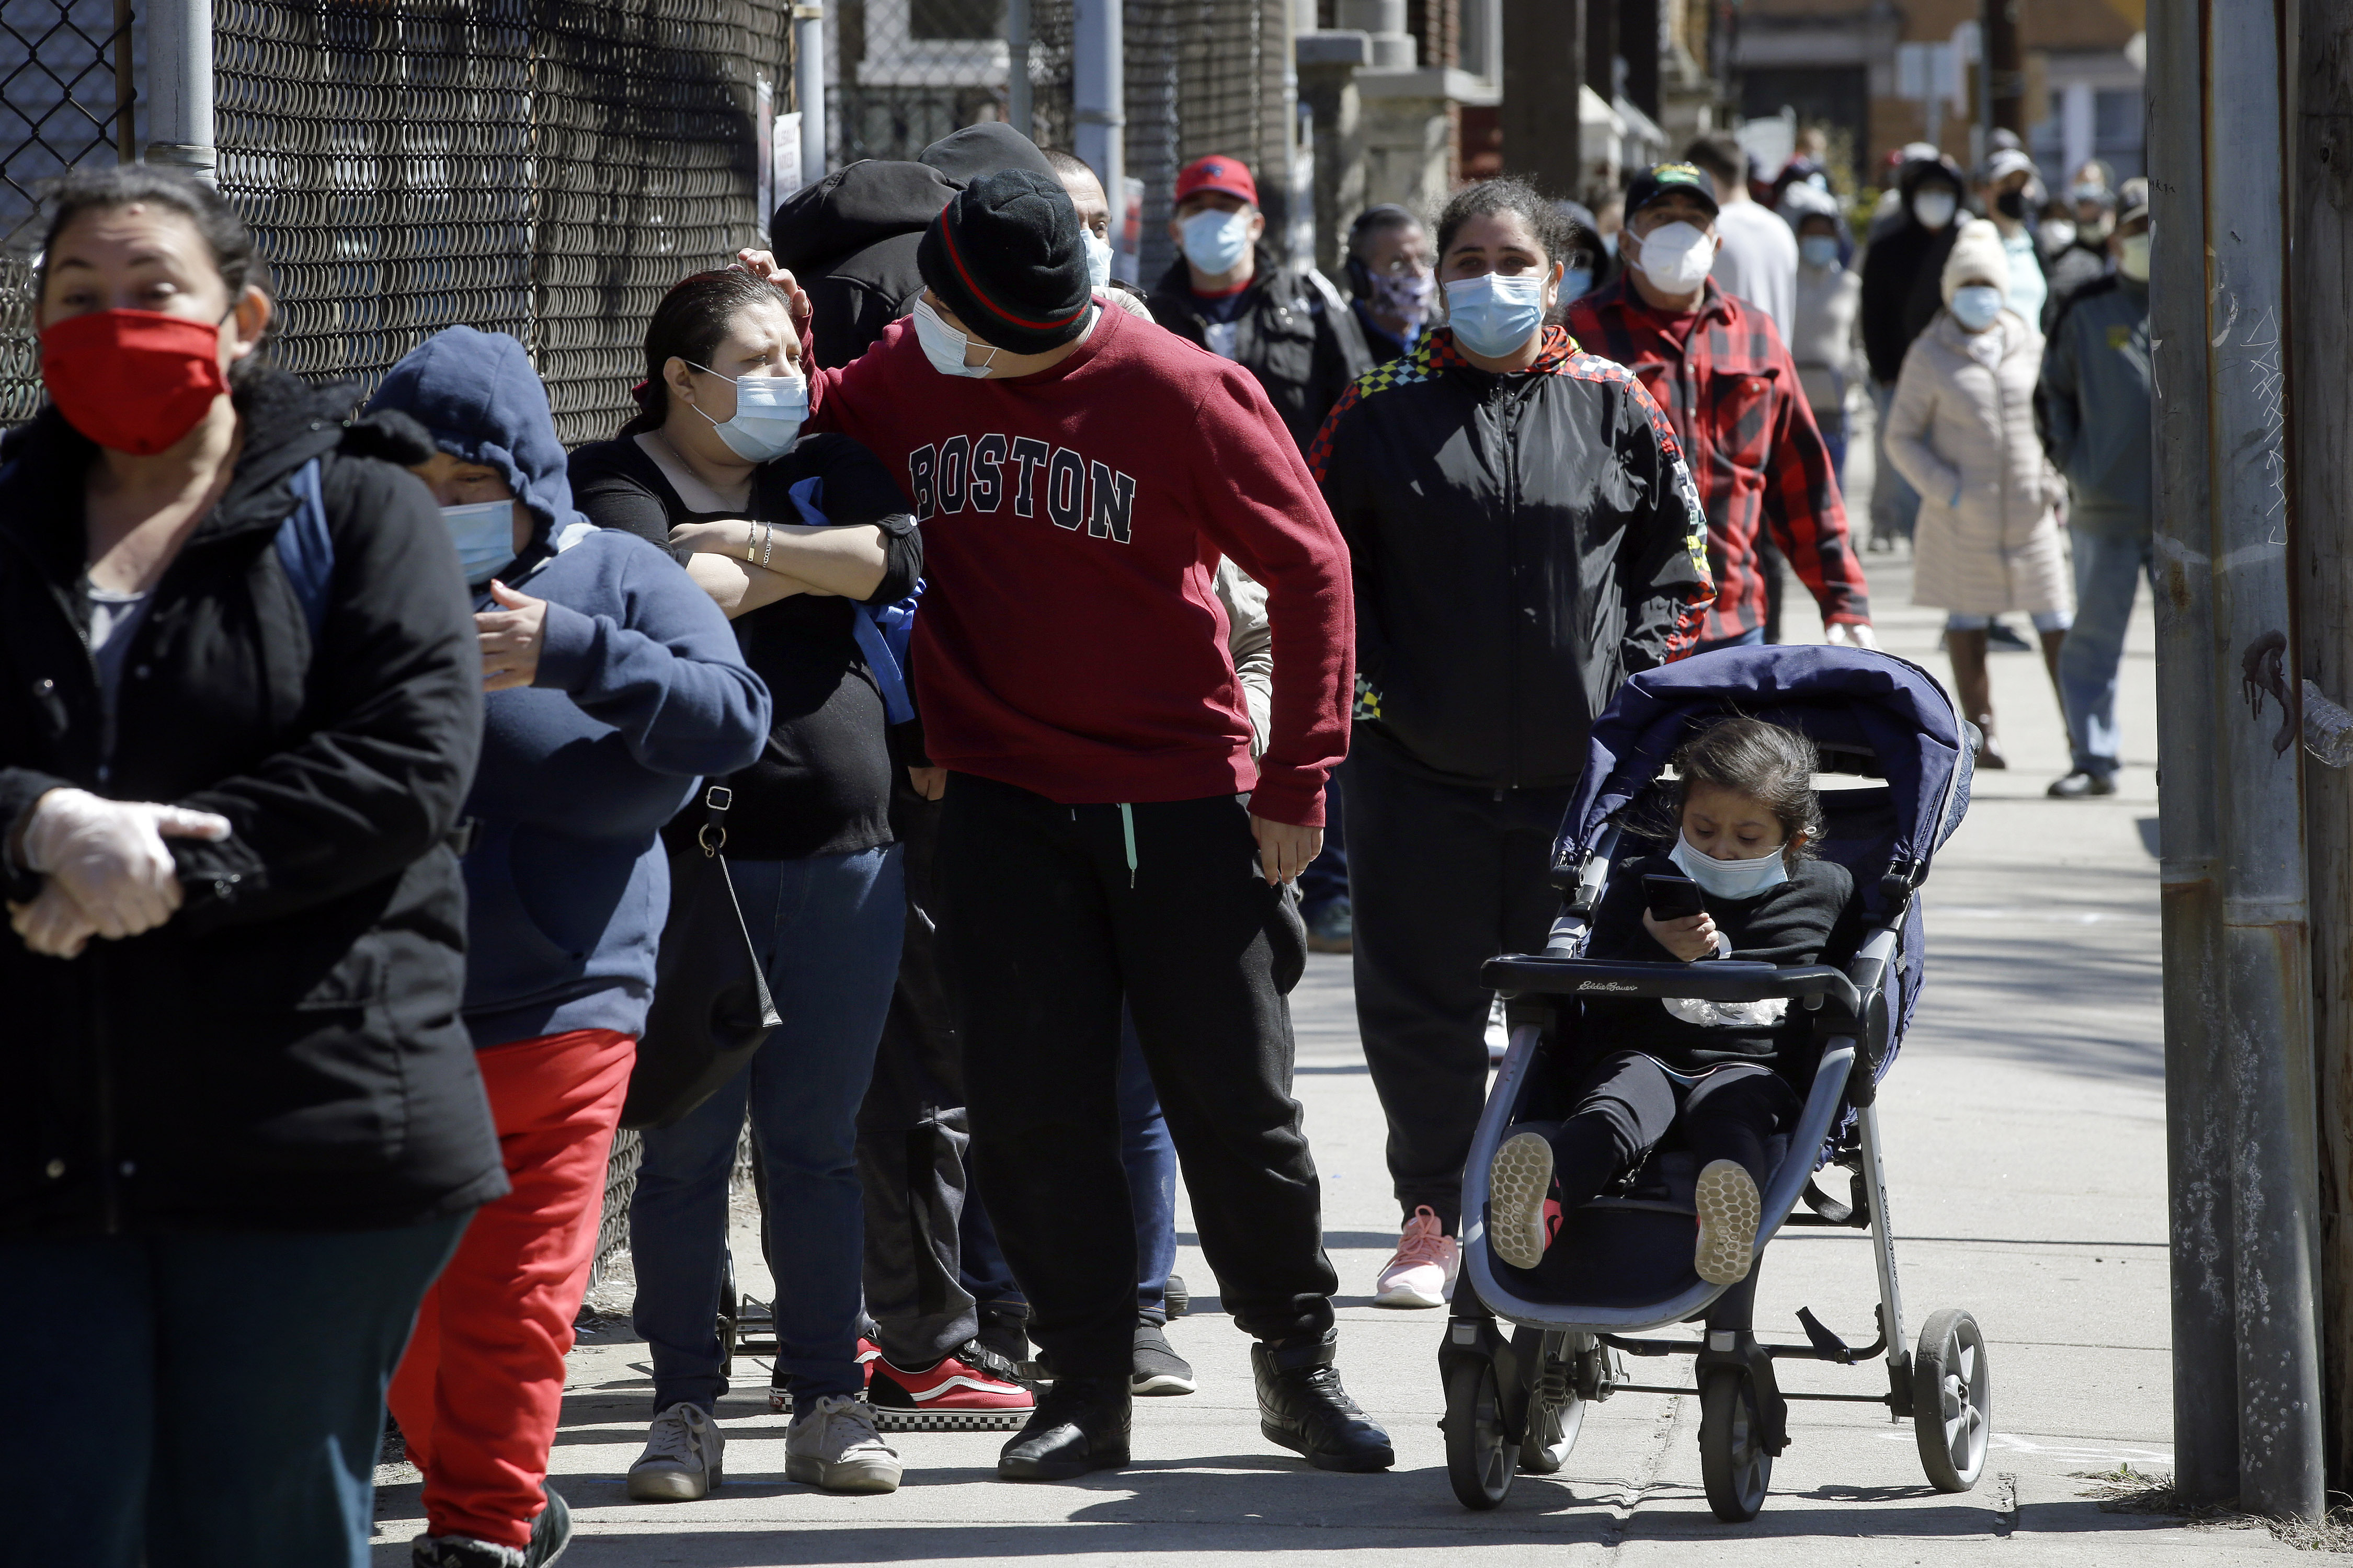 People wear masks out of concern for the coronavirus while standing in line outside a Salvation Army food pantry, Tuesday, May 5, 2020, in Chelsea, Mass. (AP Photo/Steven Senne)